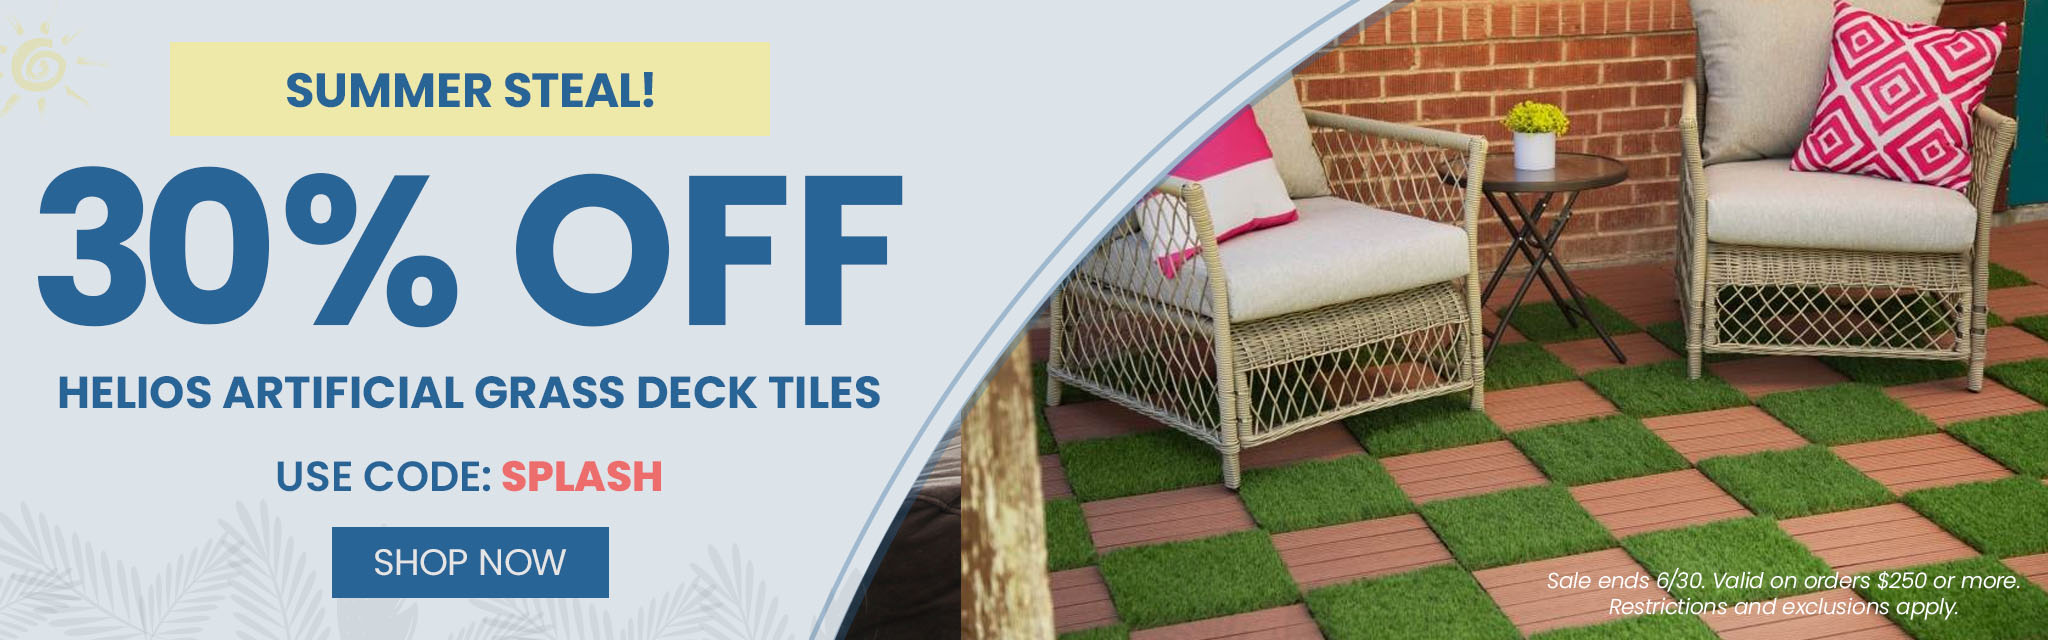 Summer Steal! 30% Off Helios Artificial Grass Deck Tiles. Use code: SPLASH. Shop Now. Sale ends 6/30.  Valid on orders $250 or more. Restrictions and exclusions apply.